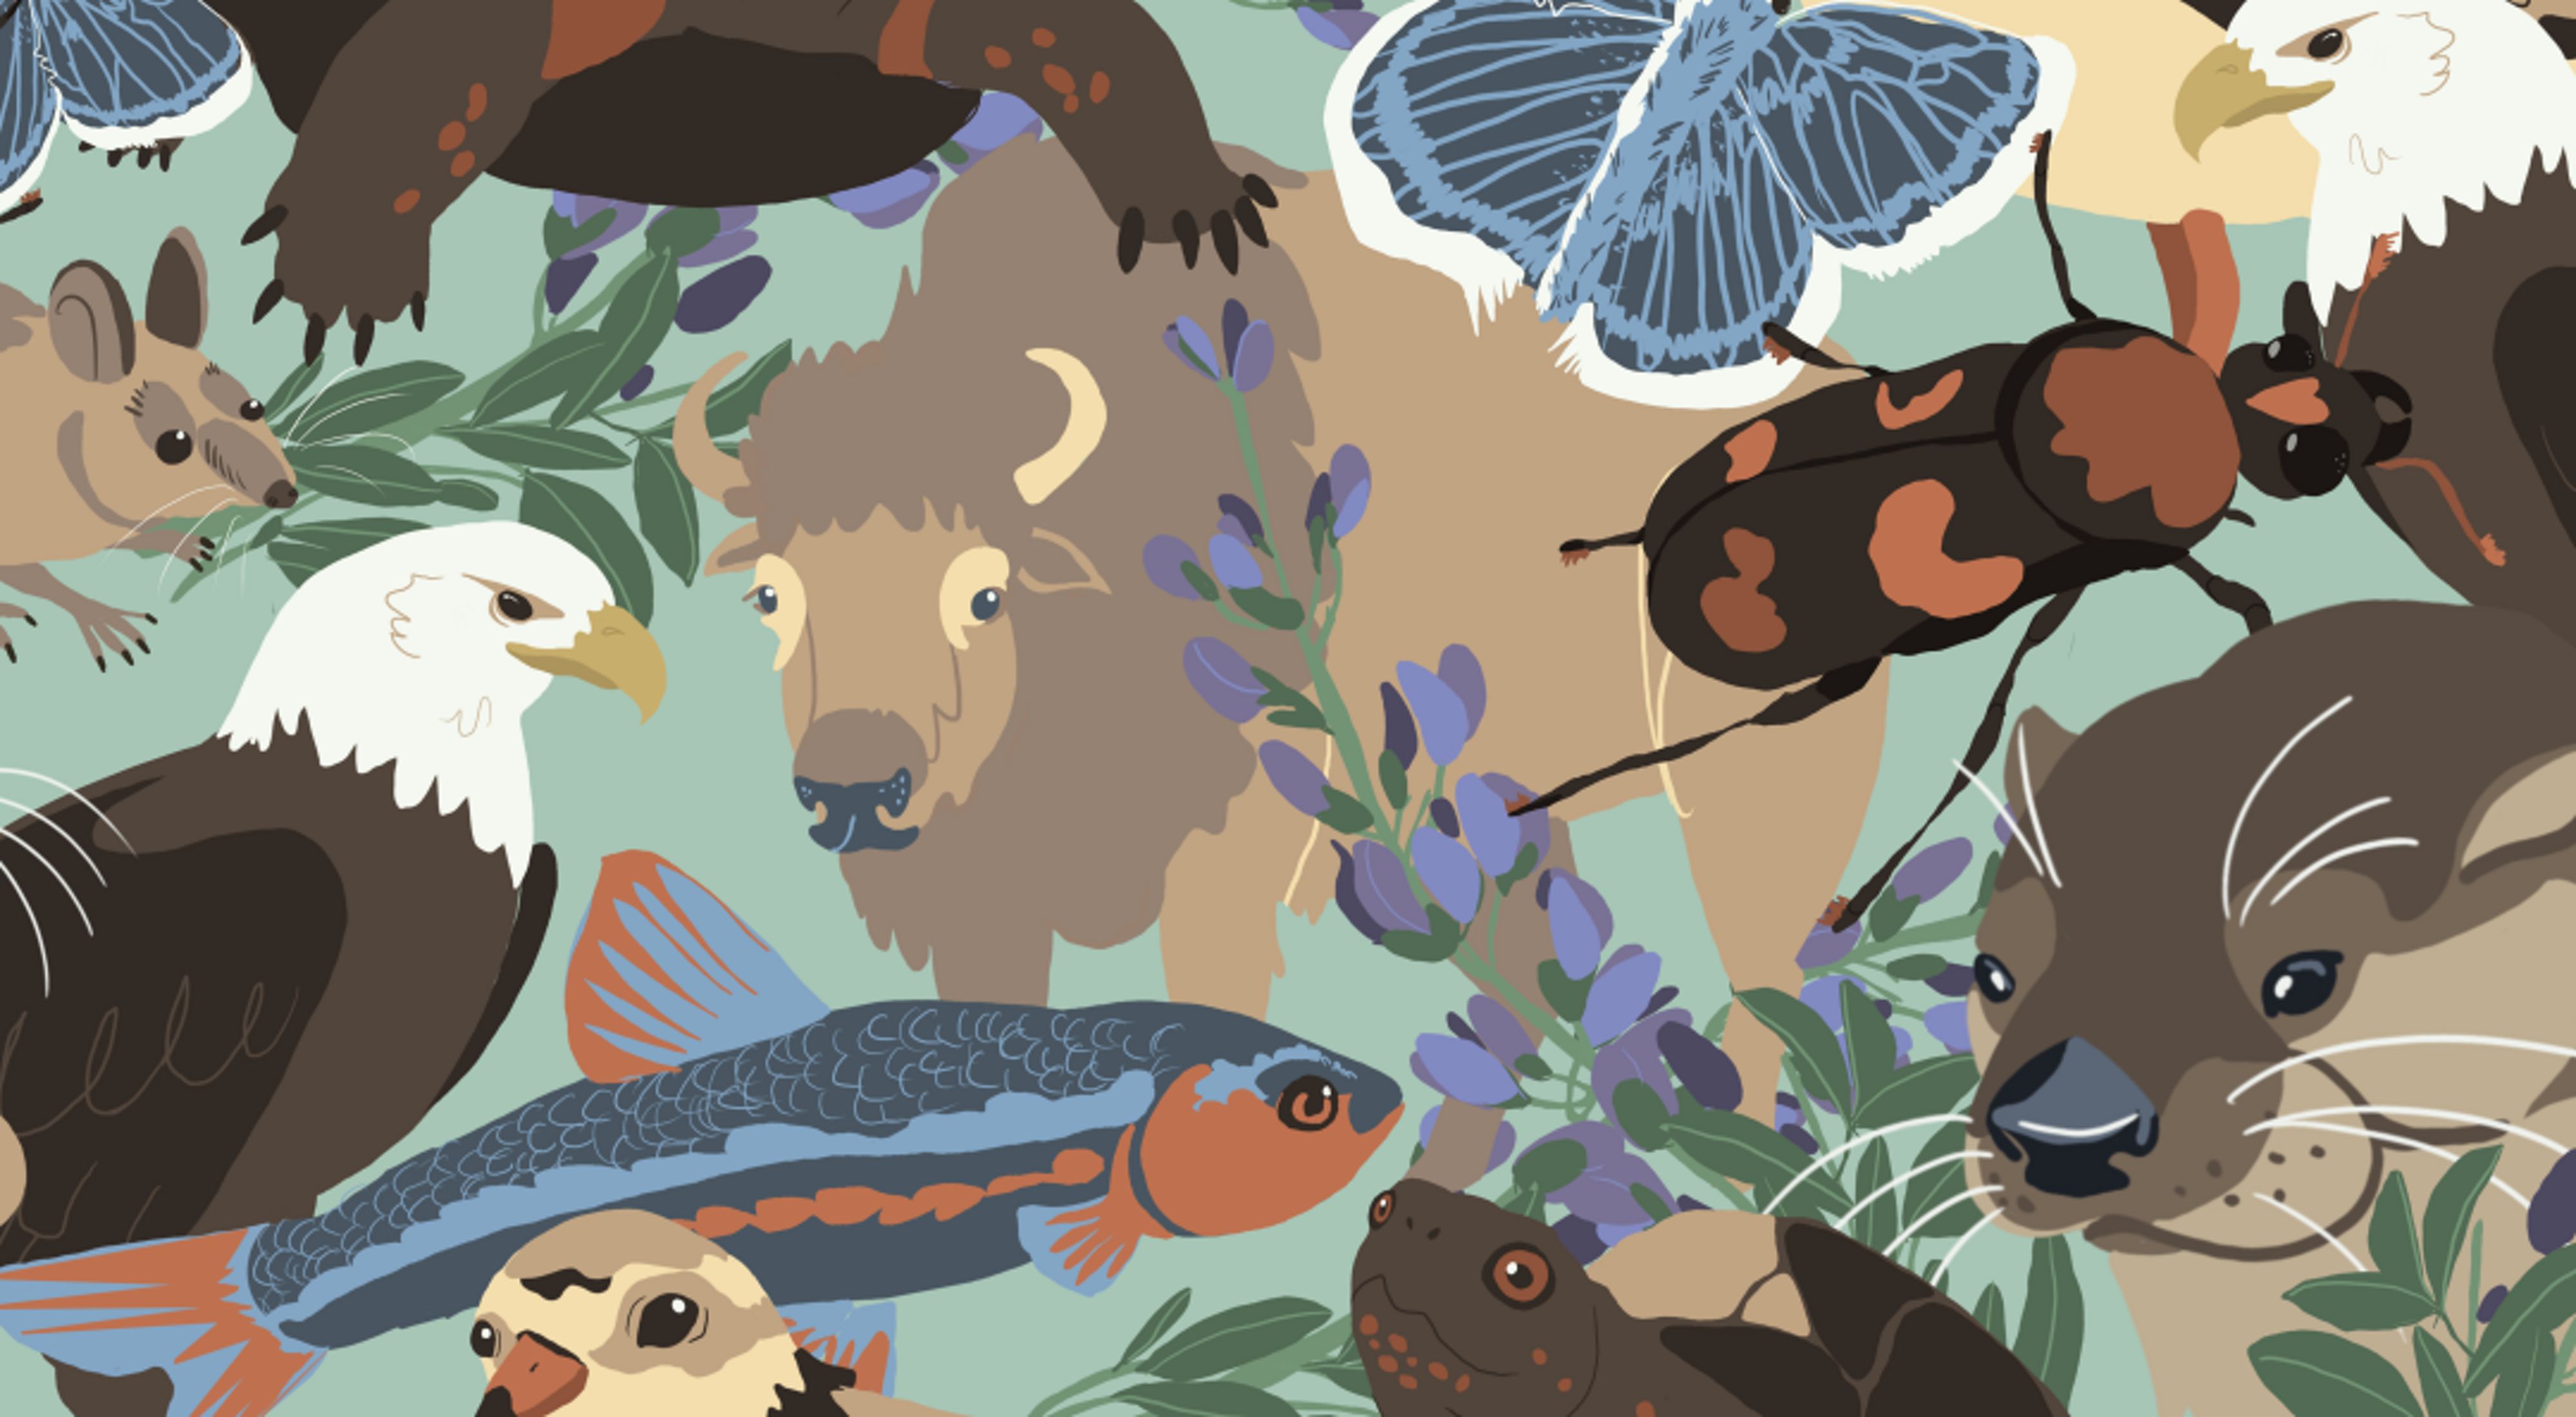 An illustration of a collage of animals.